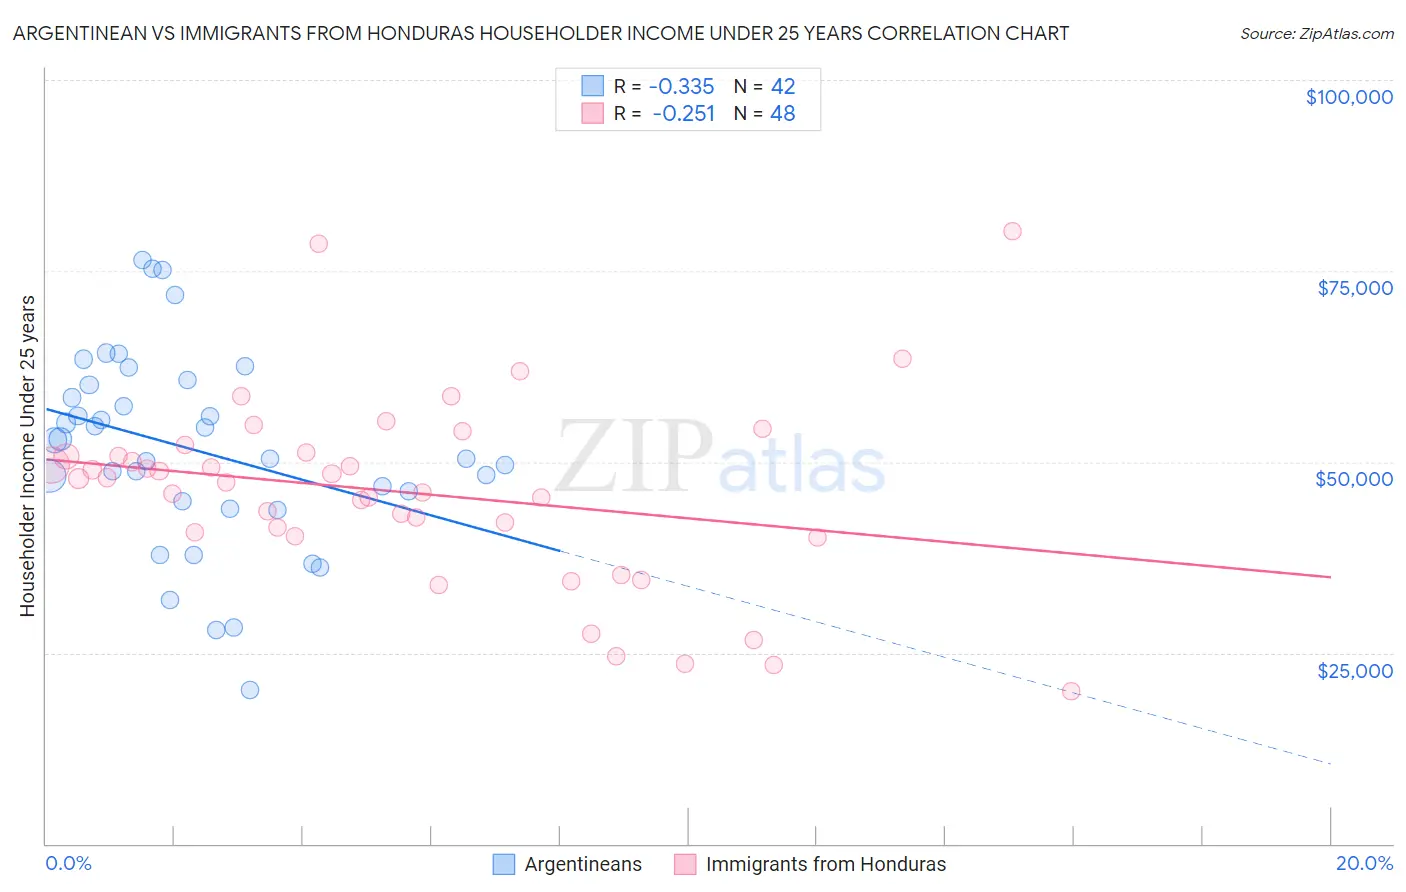 Argentinean vs Immigrants from Honduras Householder Income Under 25 years